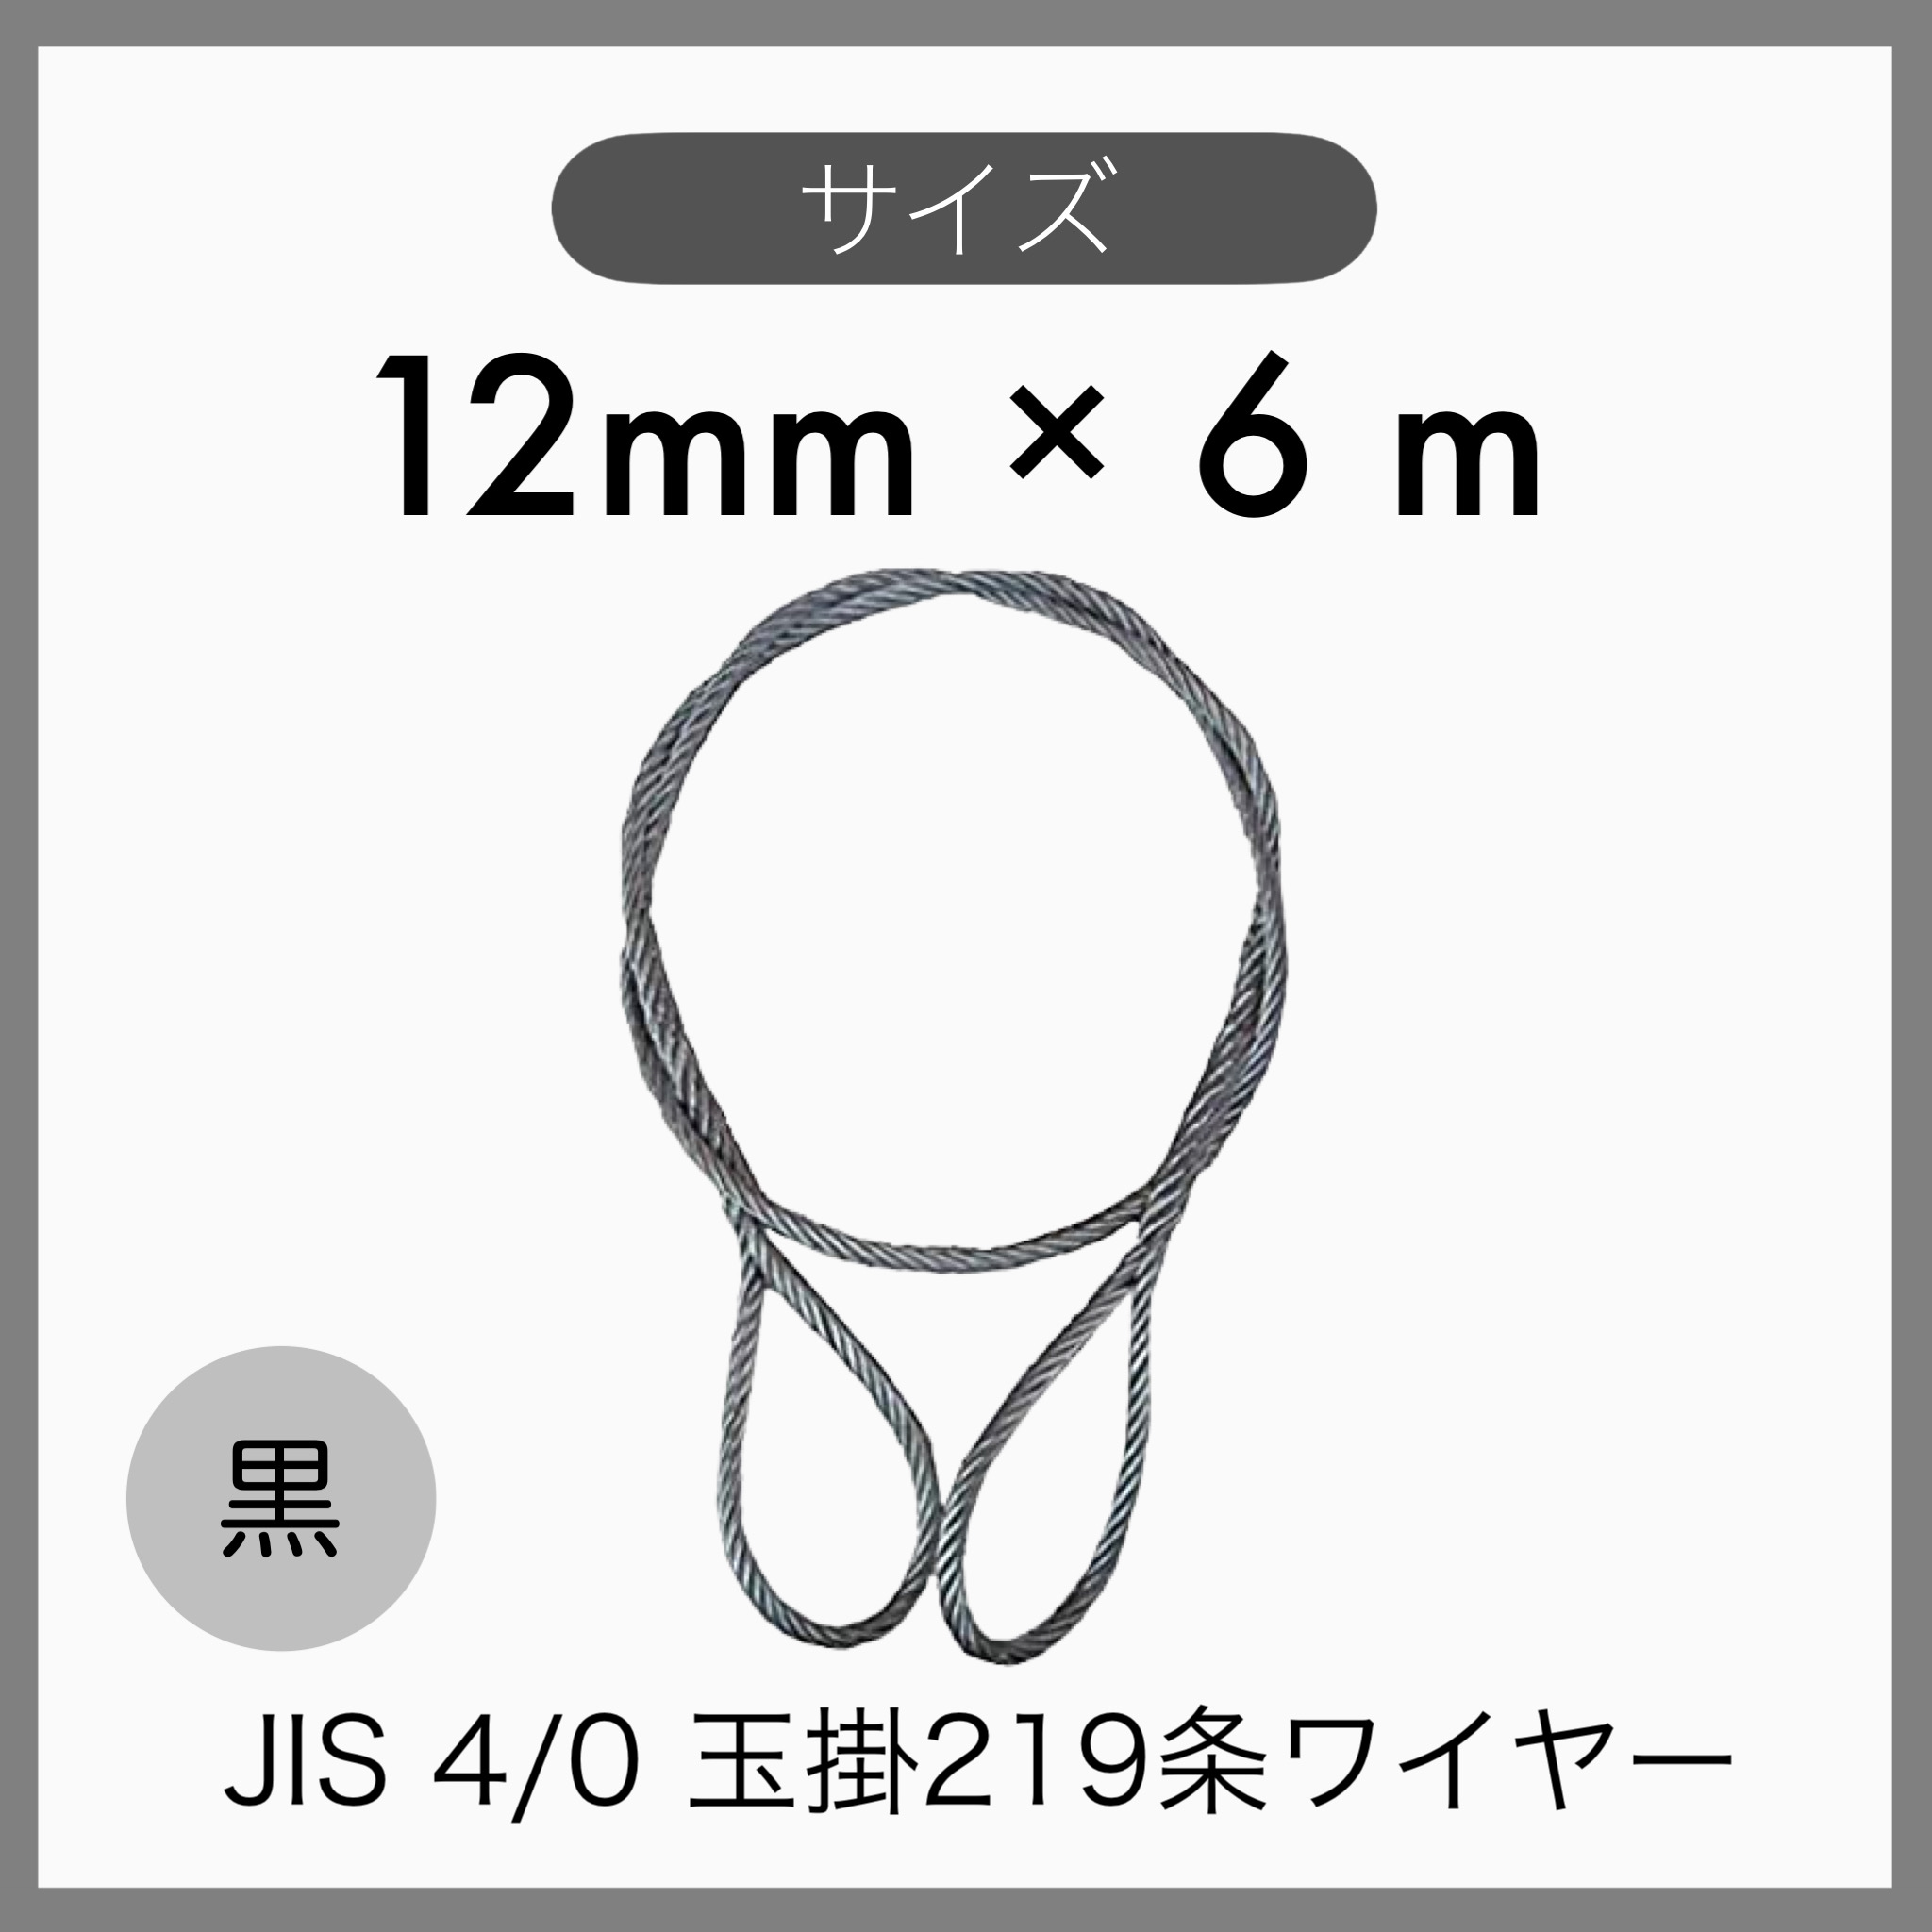 10 pcs set JIS O/O black sphere .. wire sphere ..219 article wire knitting imported goods 12mm×6m